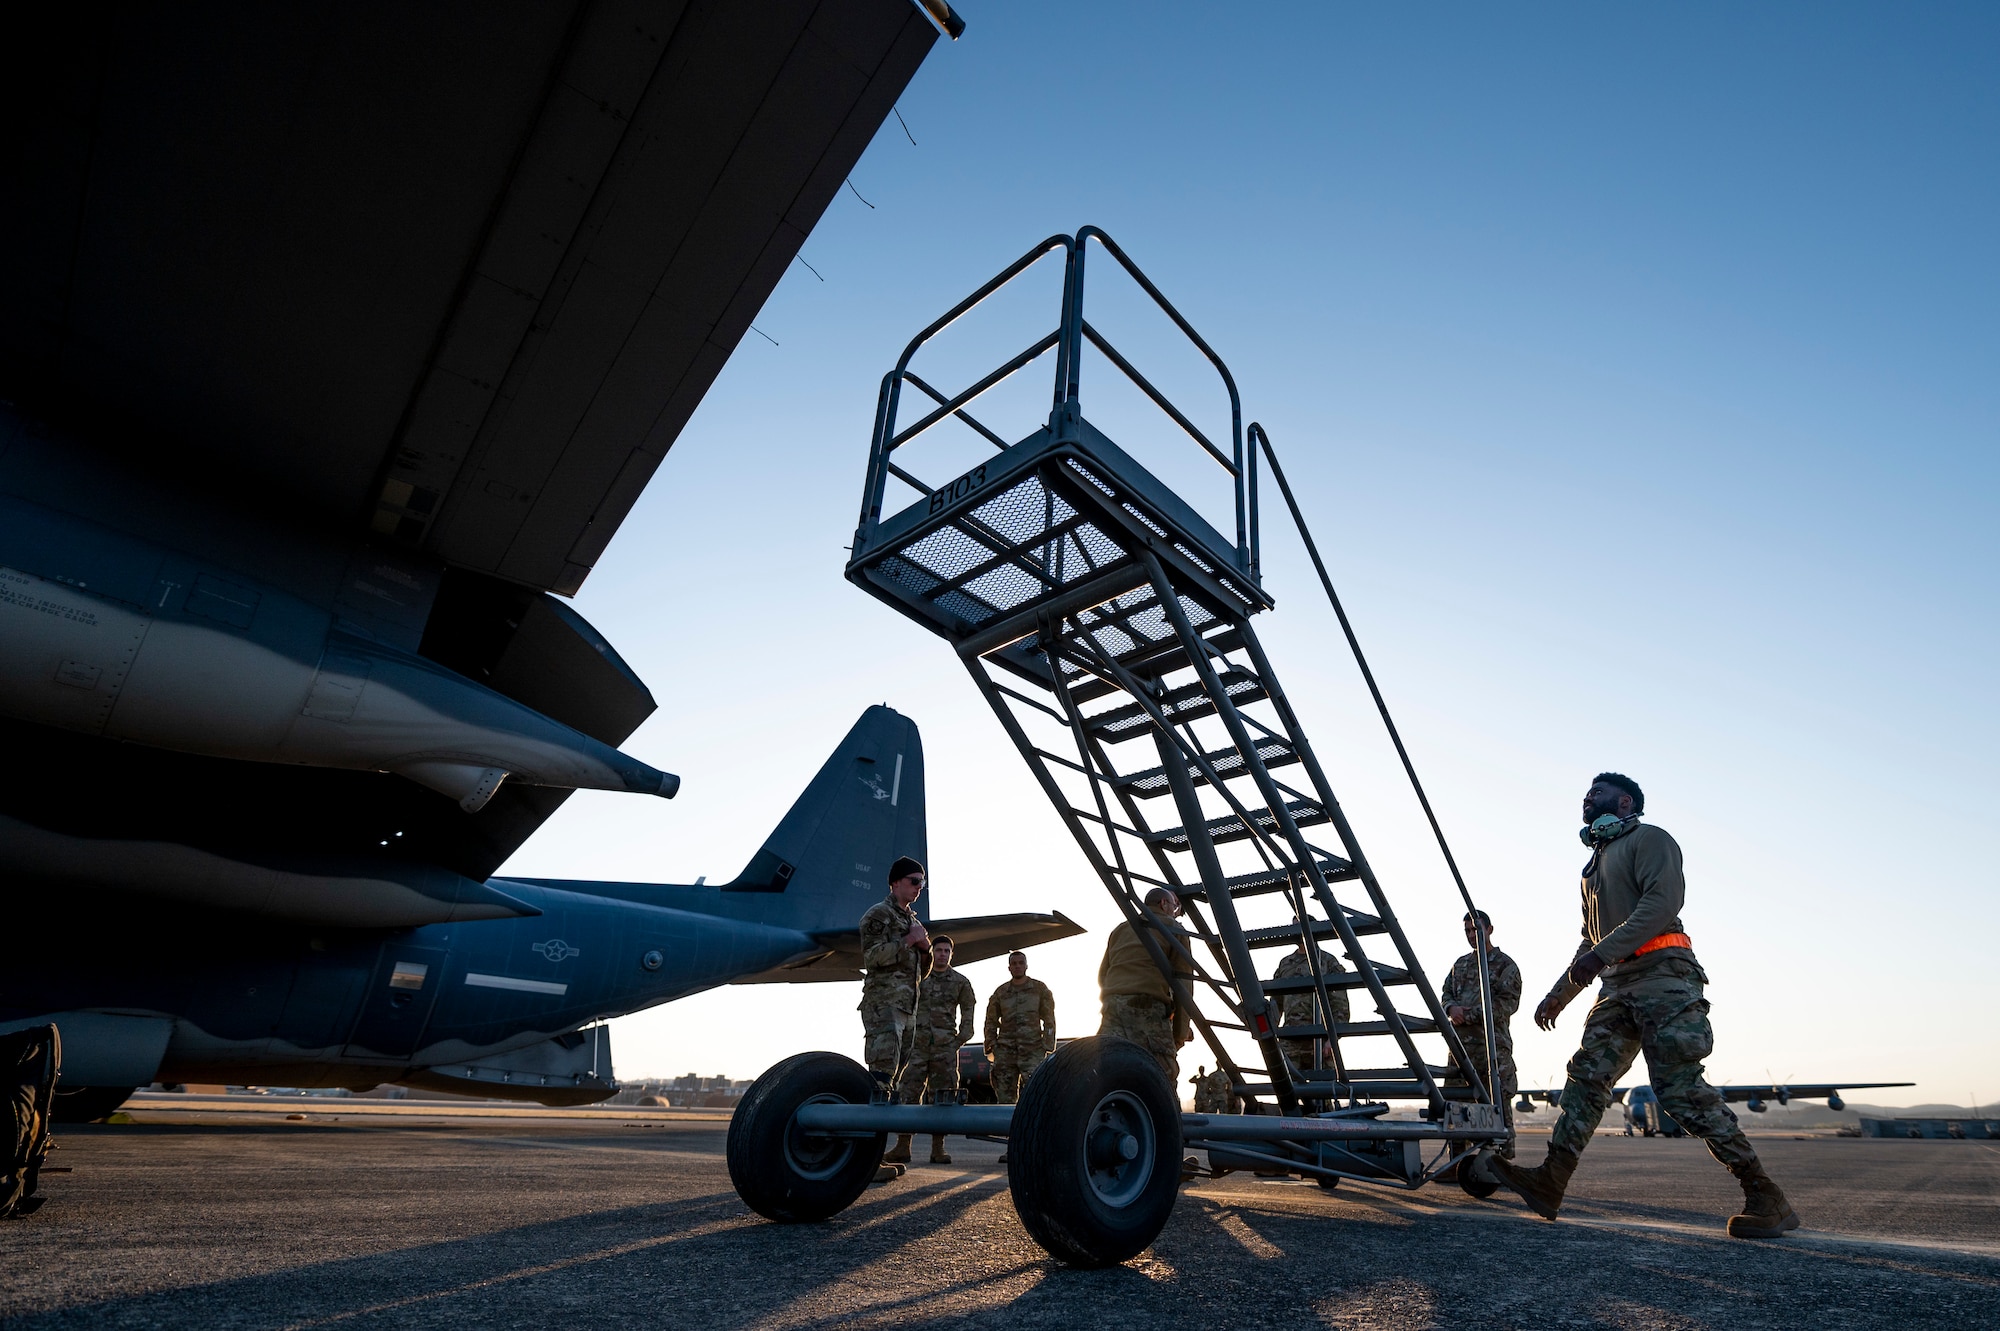 U.S. Airmen assigned to the 353rd Special Operations Aircraft Maintenance Squadron perform a post-flight inspection of an MC-130J Commando II during Freedom Shield 23 at Daegu Air Base, Republic of Korea, Mar. 14, 2023.